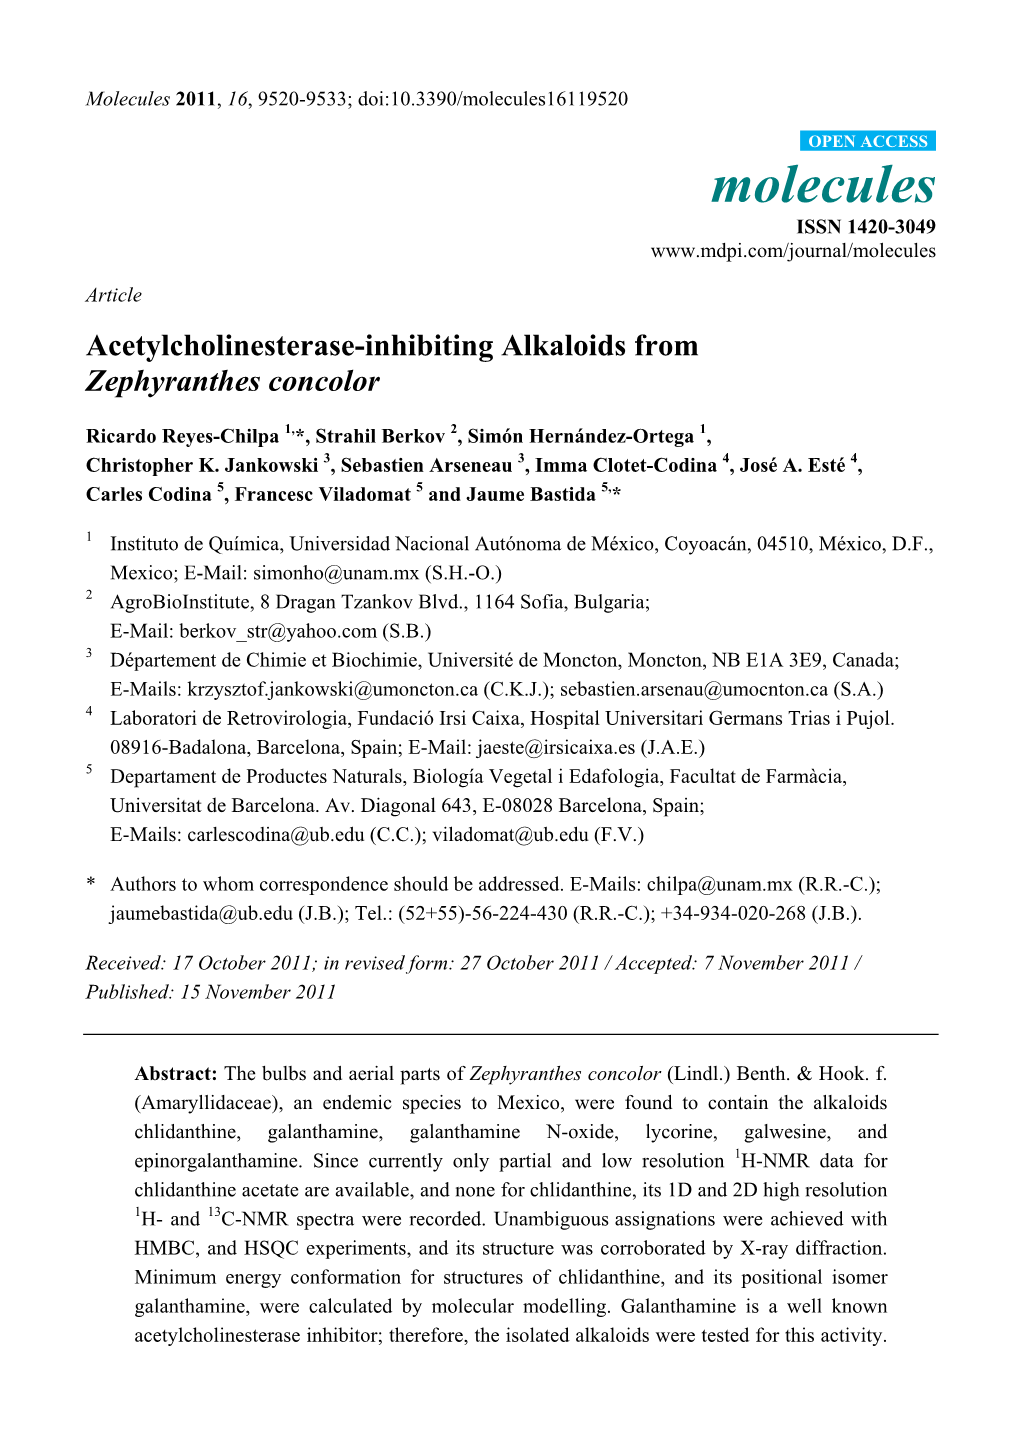 Acetylcholinesterase-Inhibiting Alkaloids from Zephyranthes Concolor